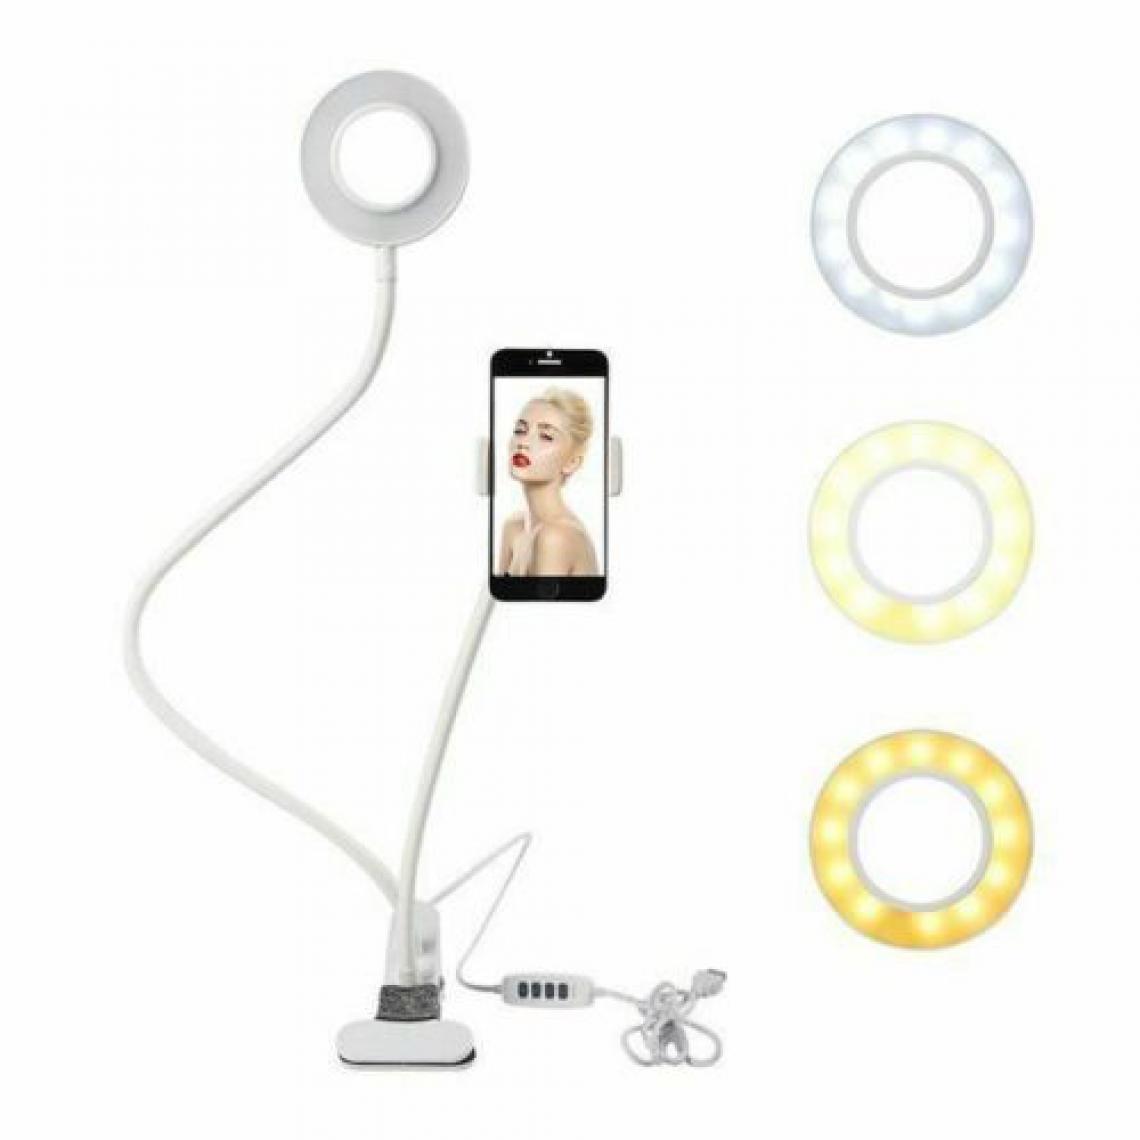 Ozzzo - Stand support bureau selfie led ozzzo blanc pour LG Stylo 5 - Station d'accueil smartphone